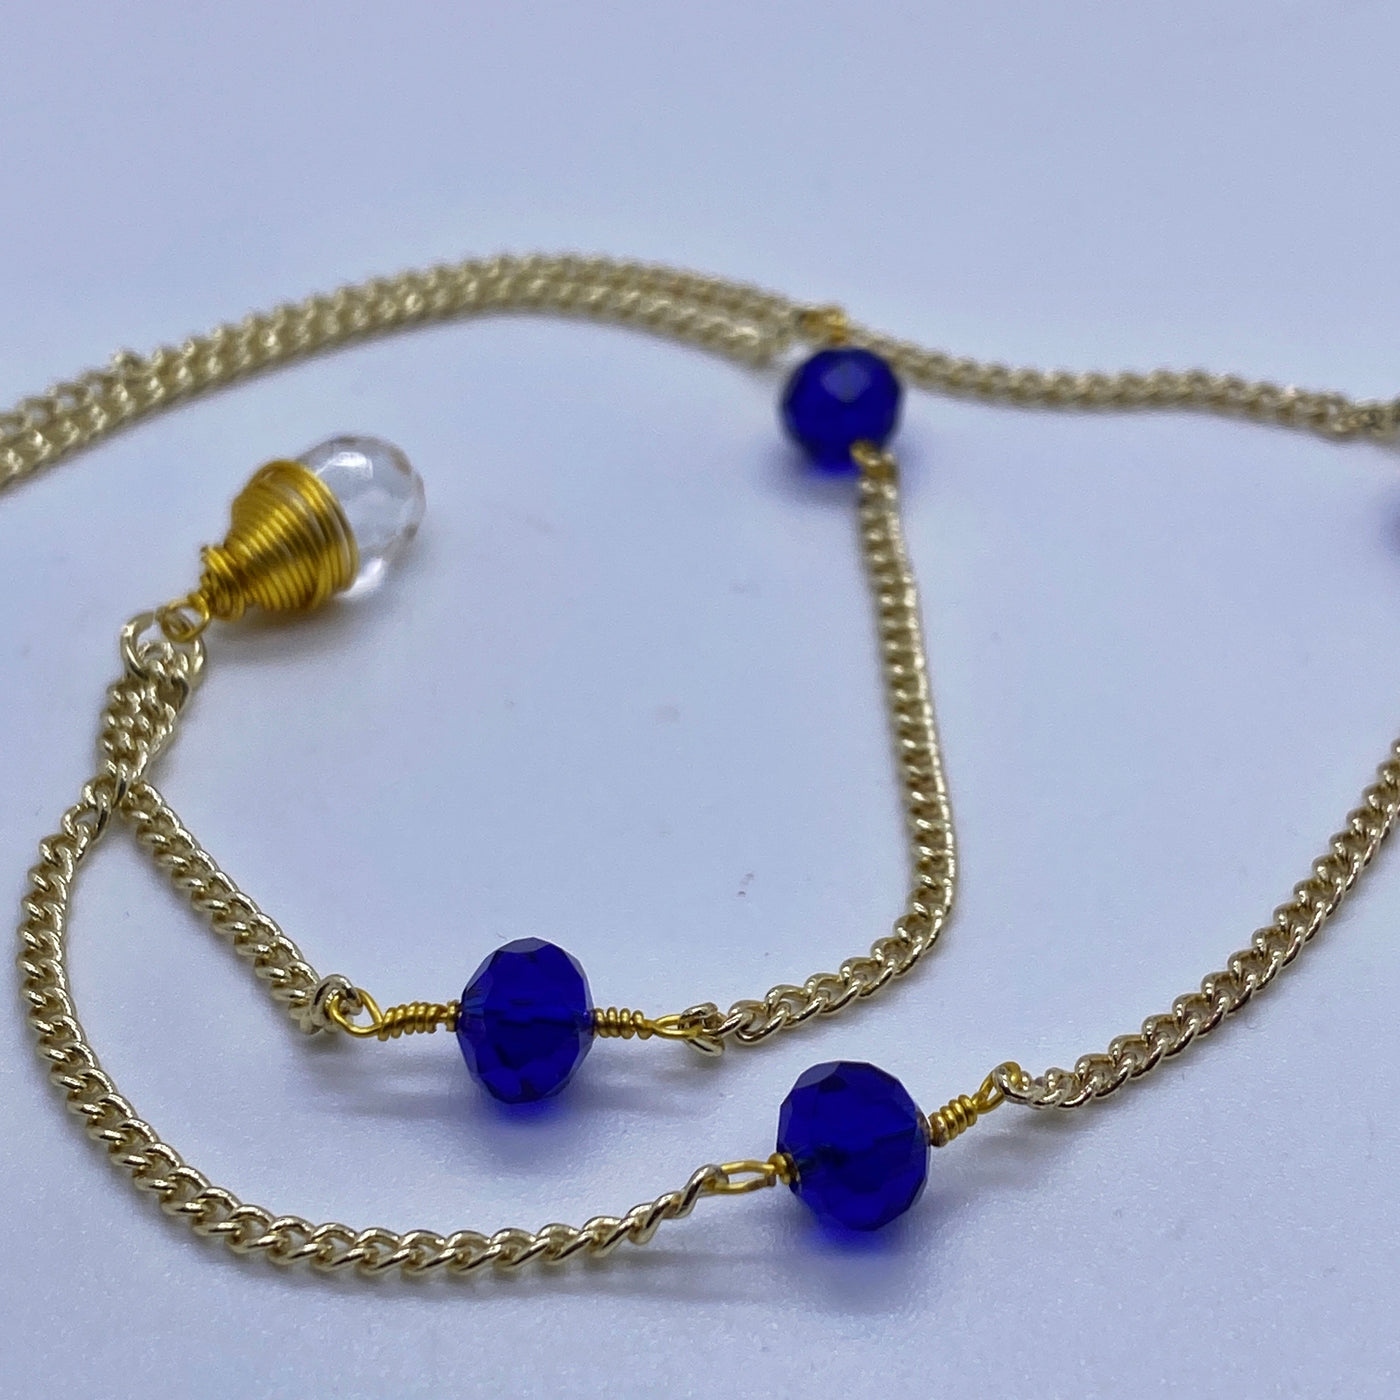 Brass chain and blue rondelle necklace with quartz briolette pending. The total length if 48 cm.